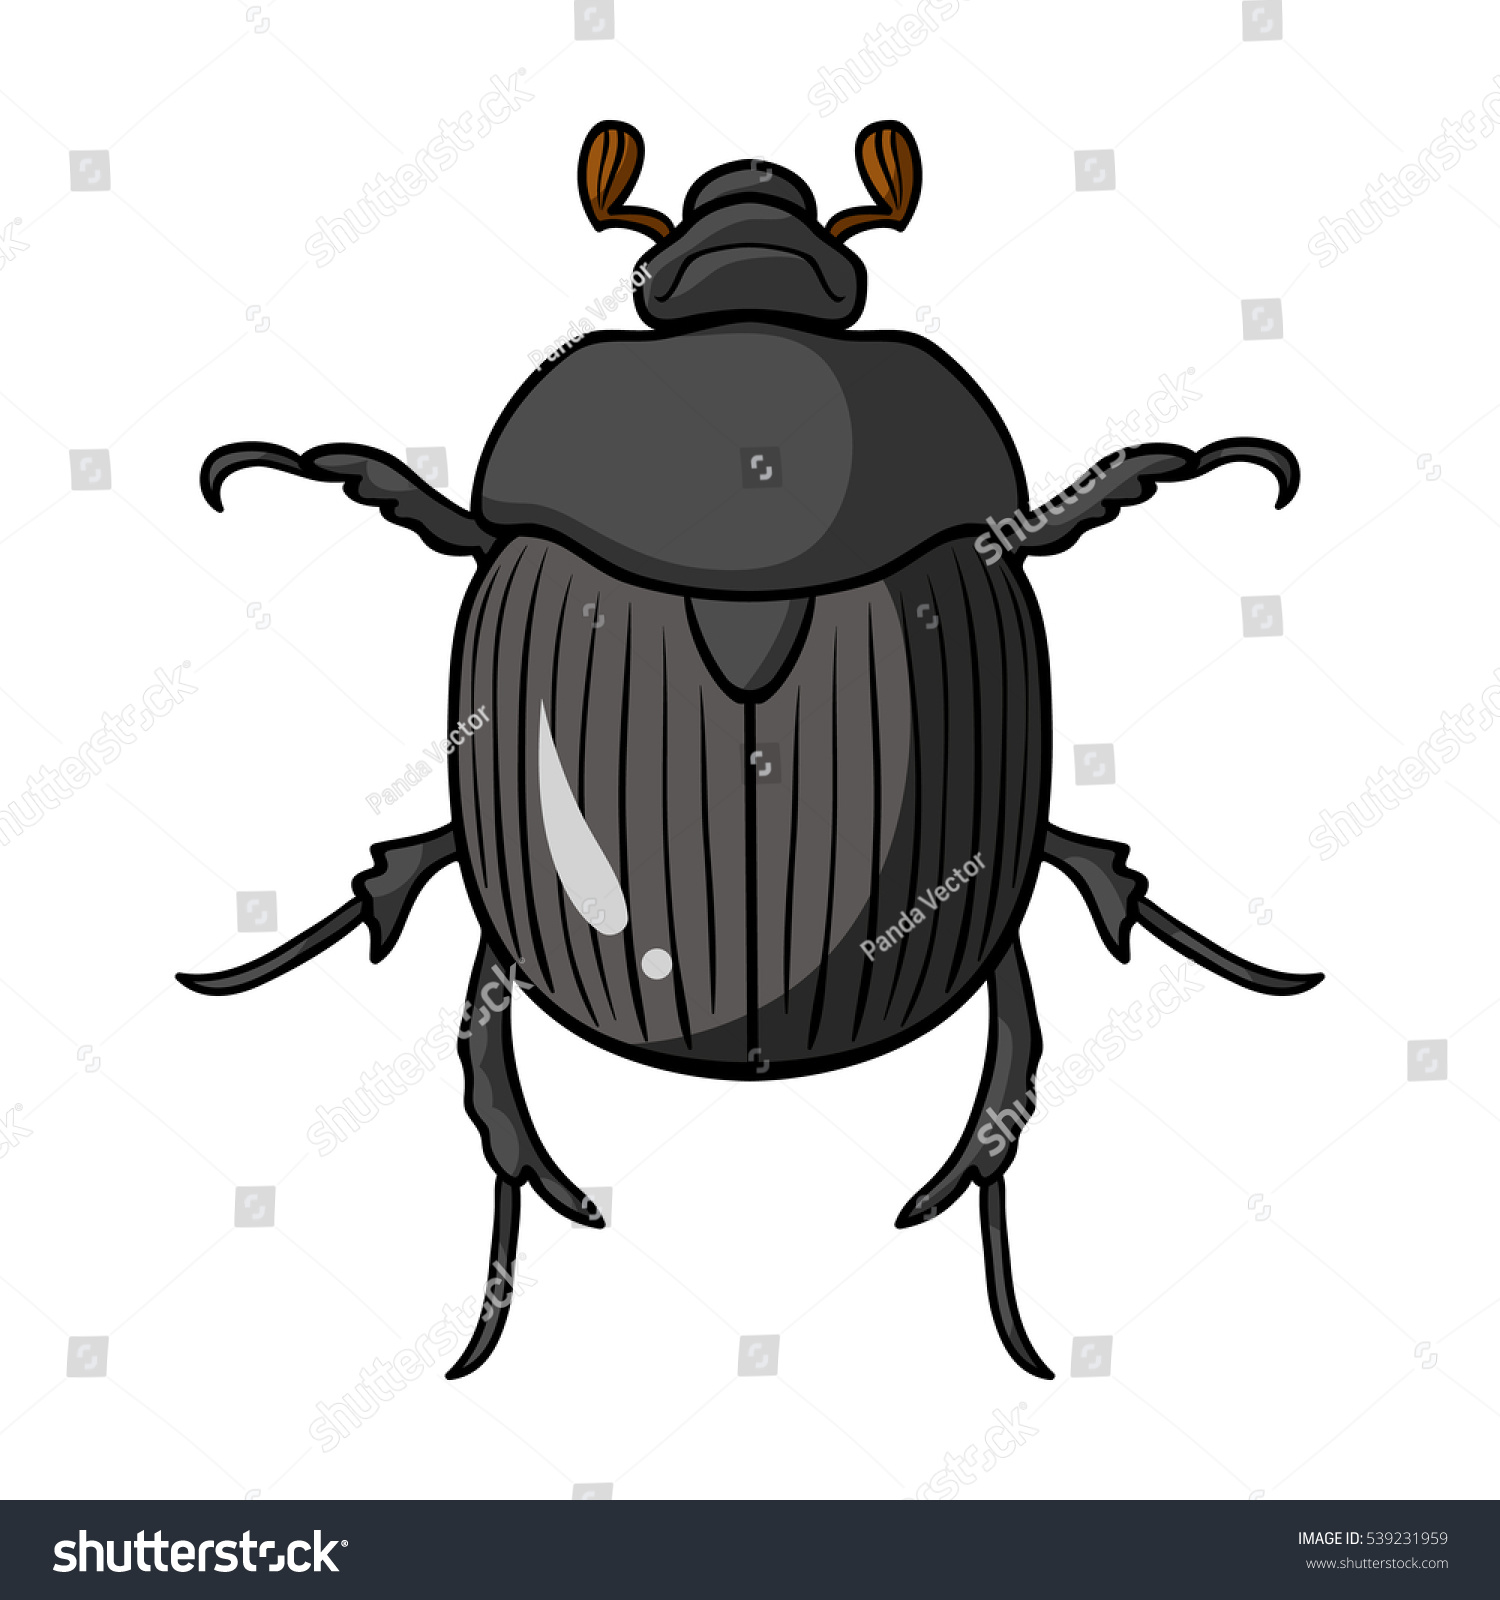 SVG of Dor-beetle icon in cartoon style isolated on white background. Insects symbol stock vector illustration. svg